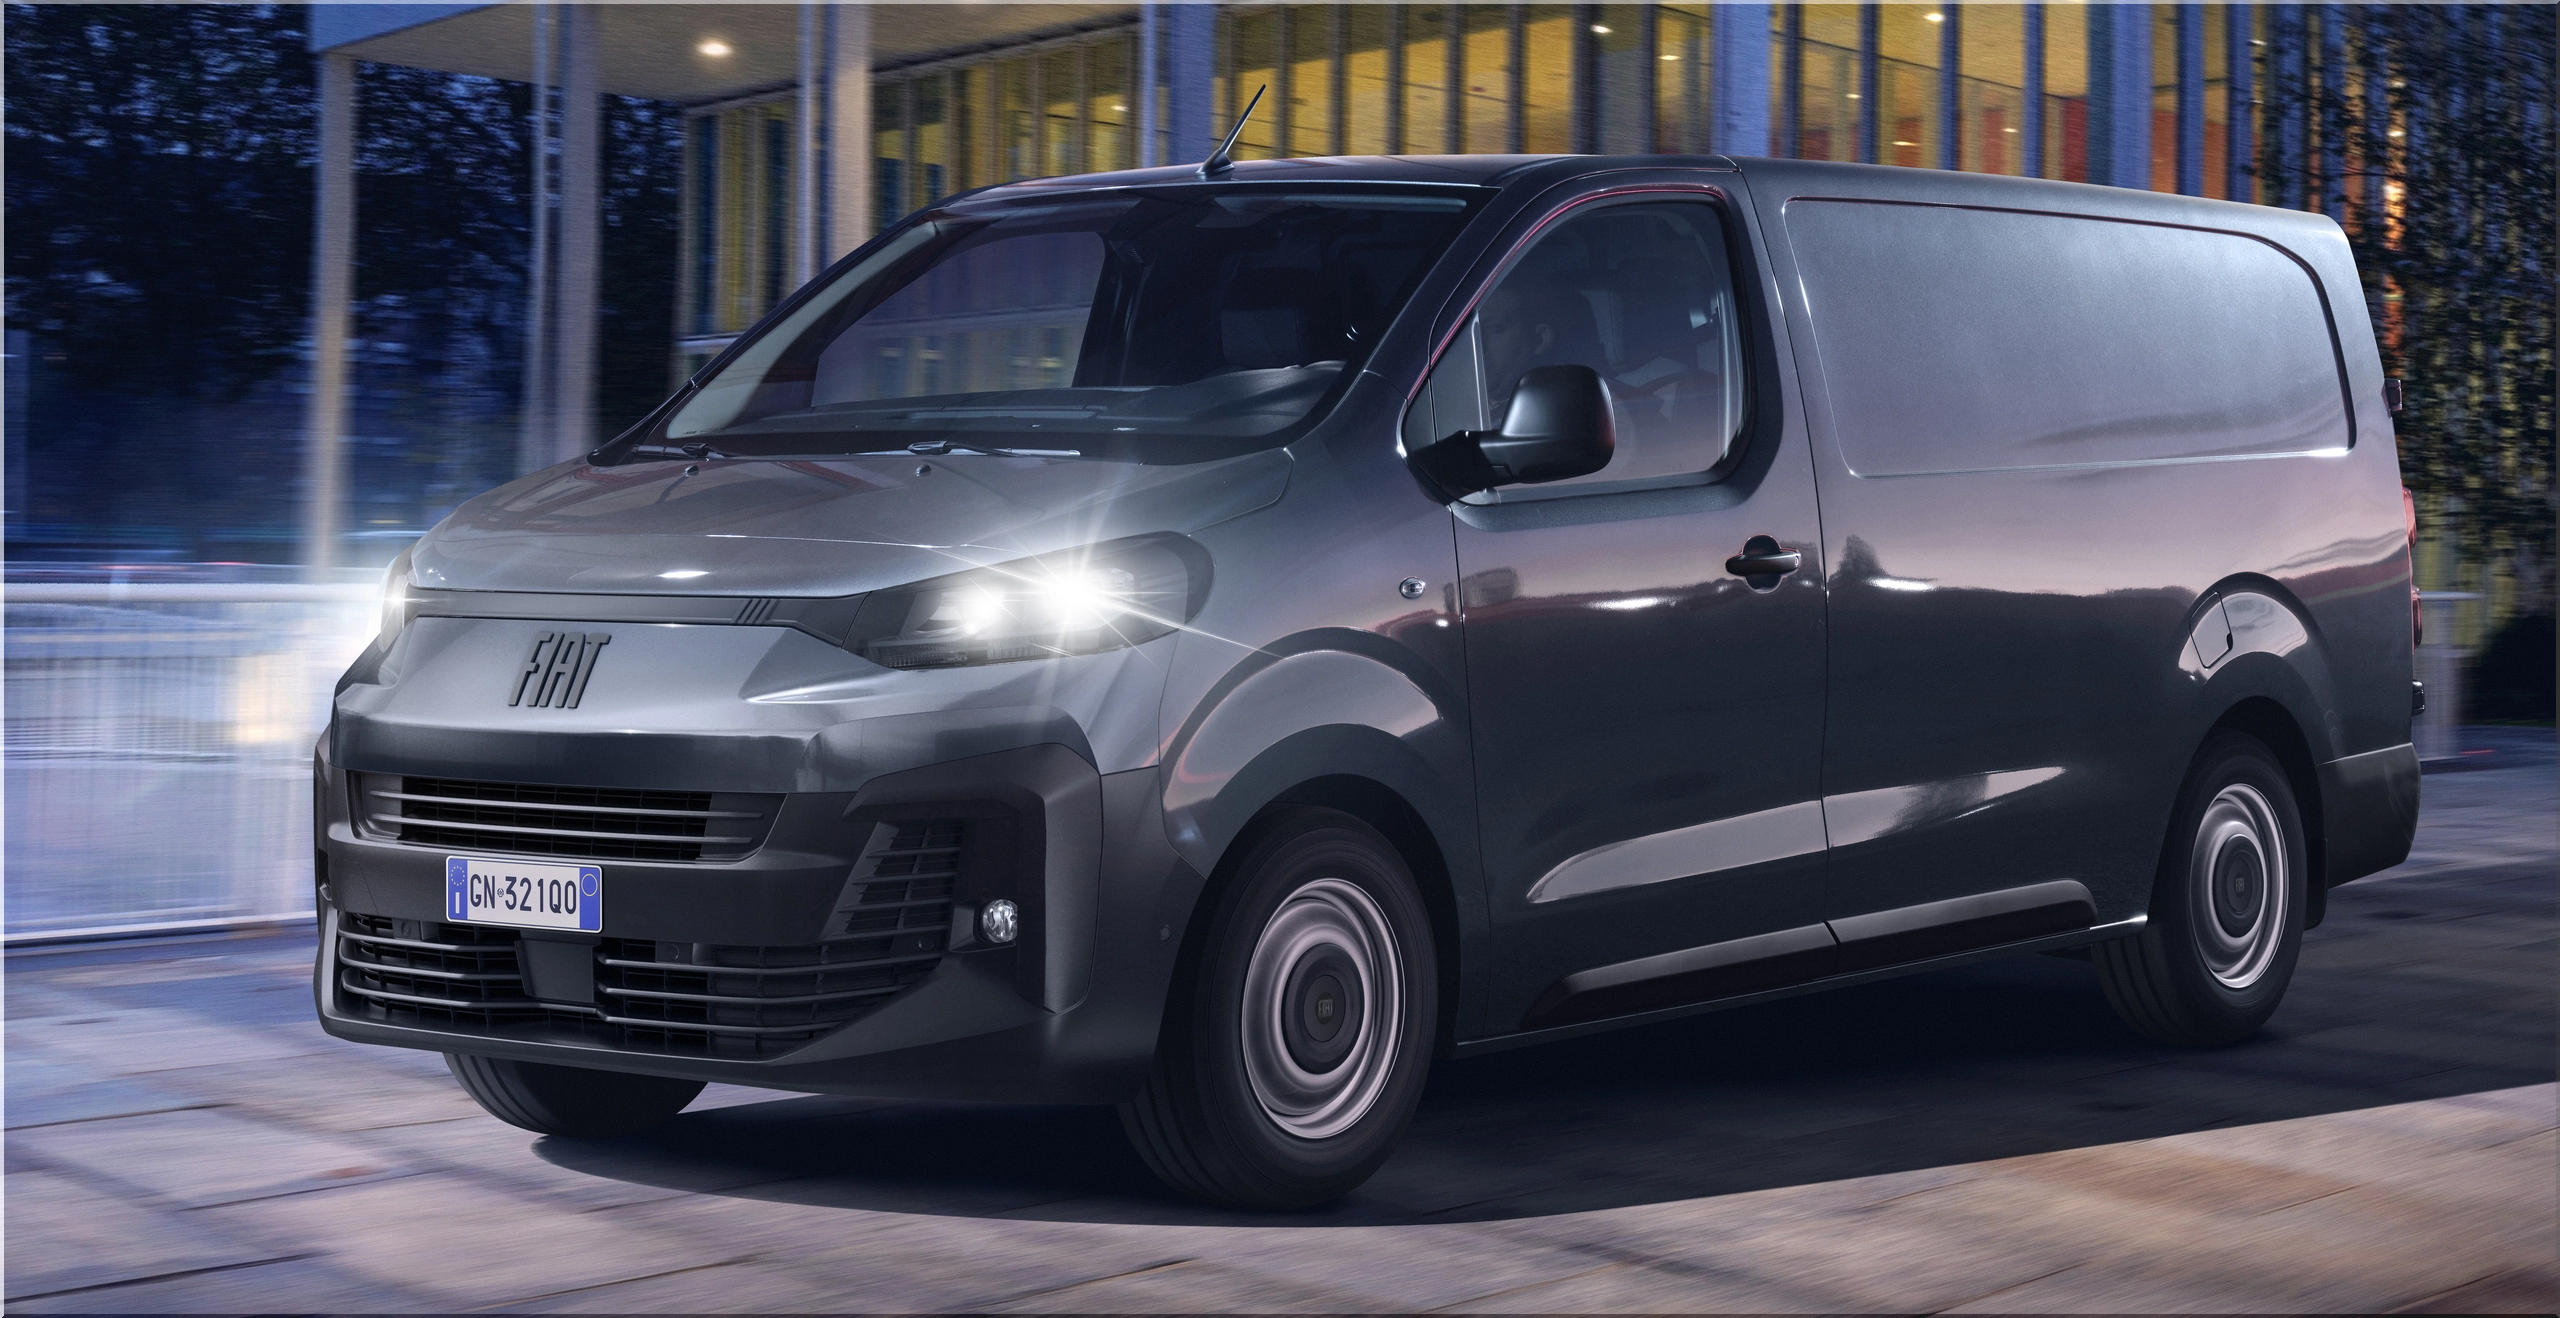 The new Fiat Scudo electric minivan offers 100 kW from 37,000 euros